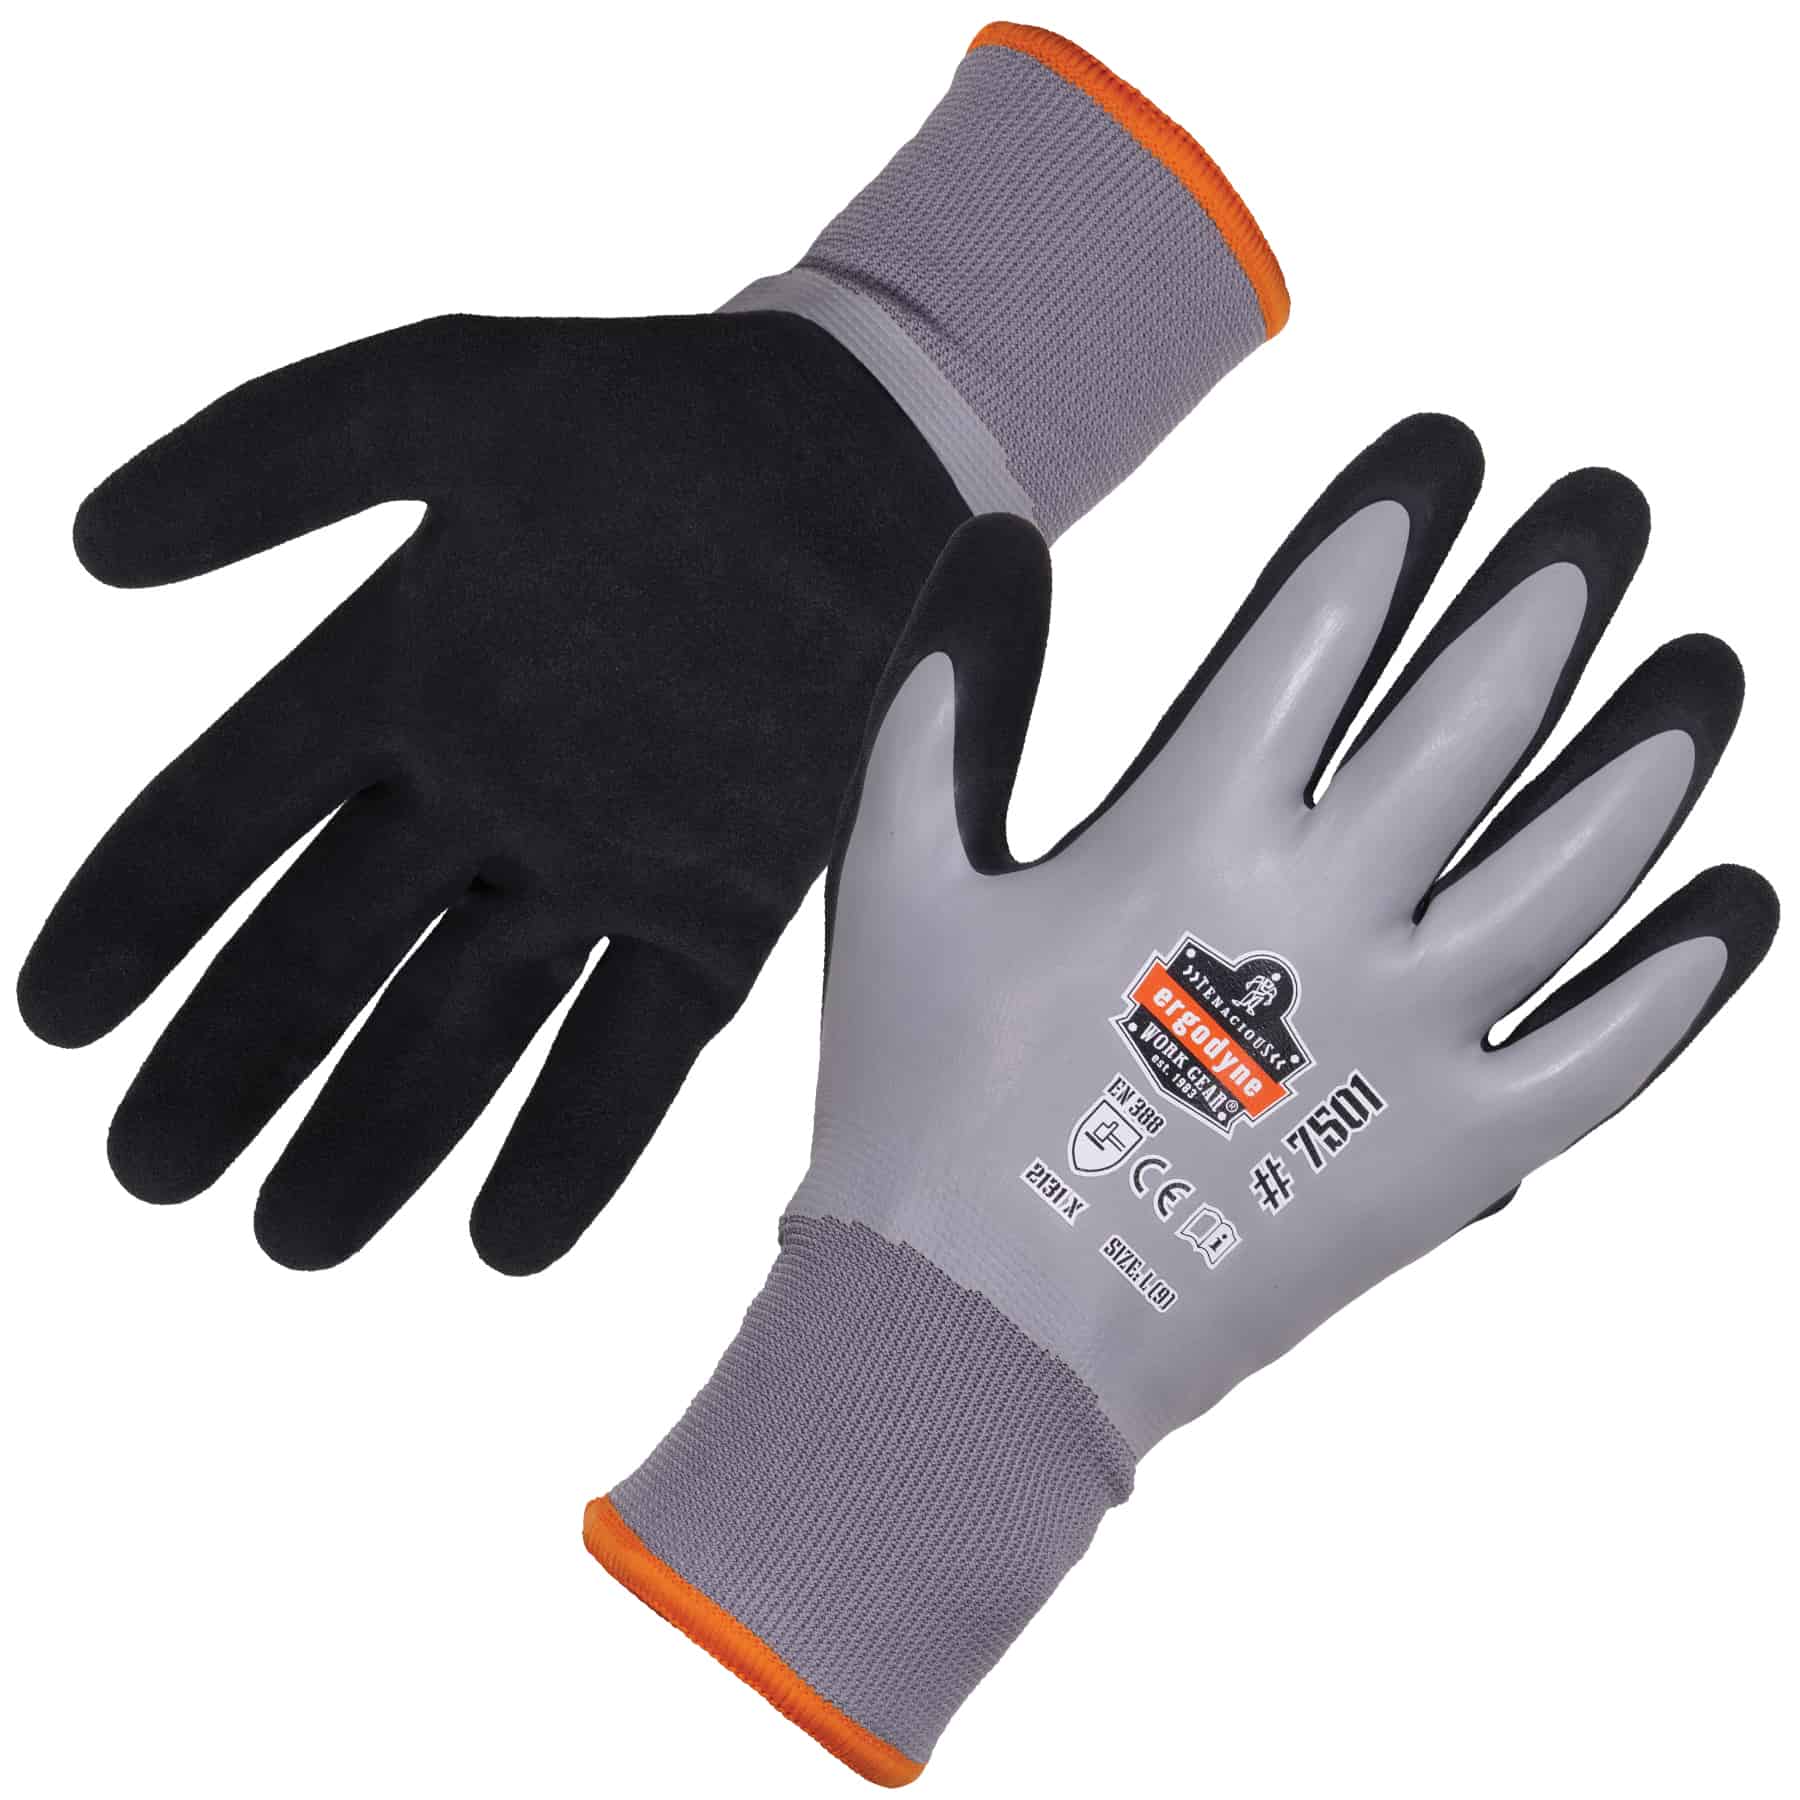 OUTDOOR SAFETY GLOVES Roofing Tiling Glass Metal Handling Latex Thermal Cold XL 